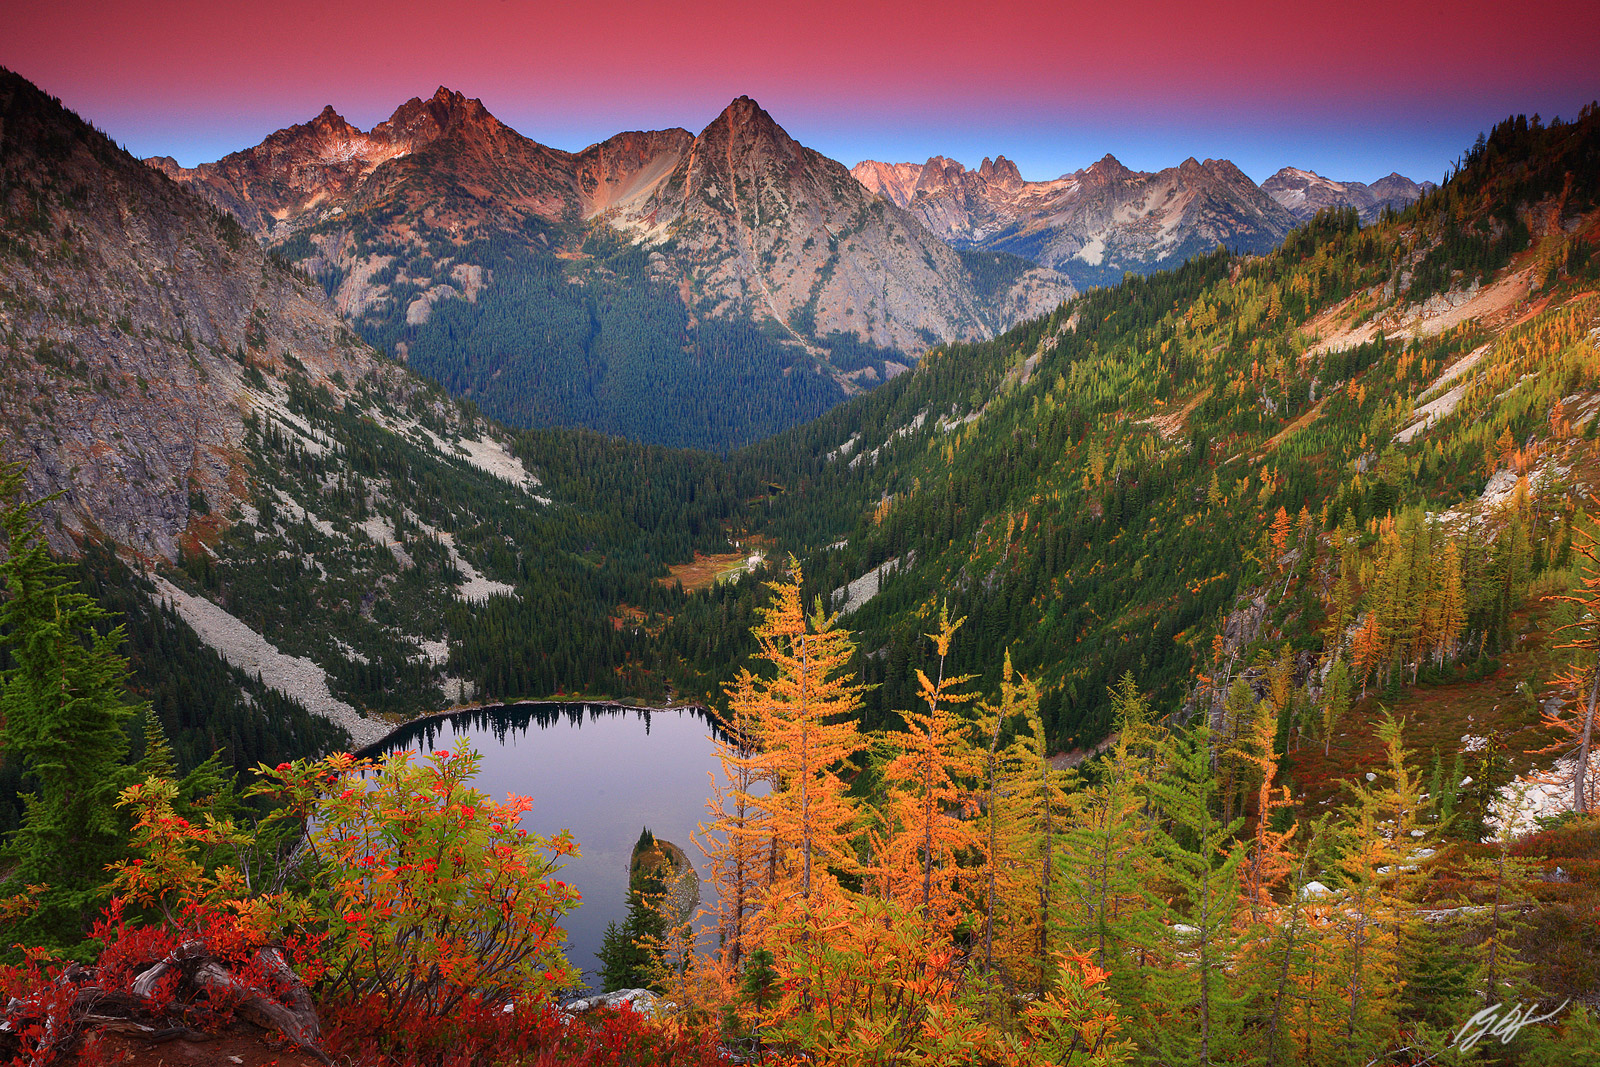 Sunset Alpenglow over Lake Ann and the North Cascades from Maple Pass in the North Cascades in Washington